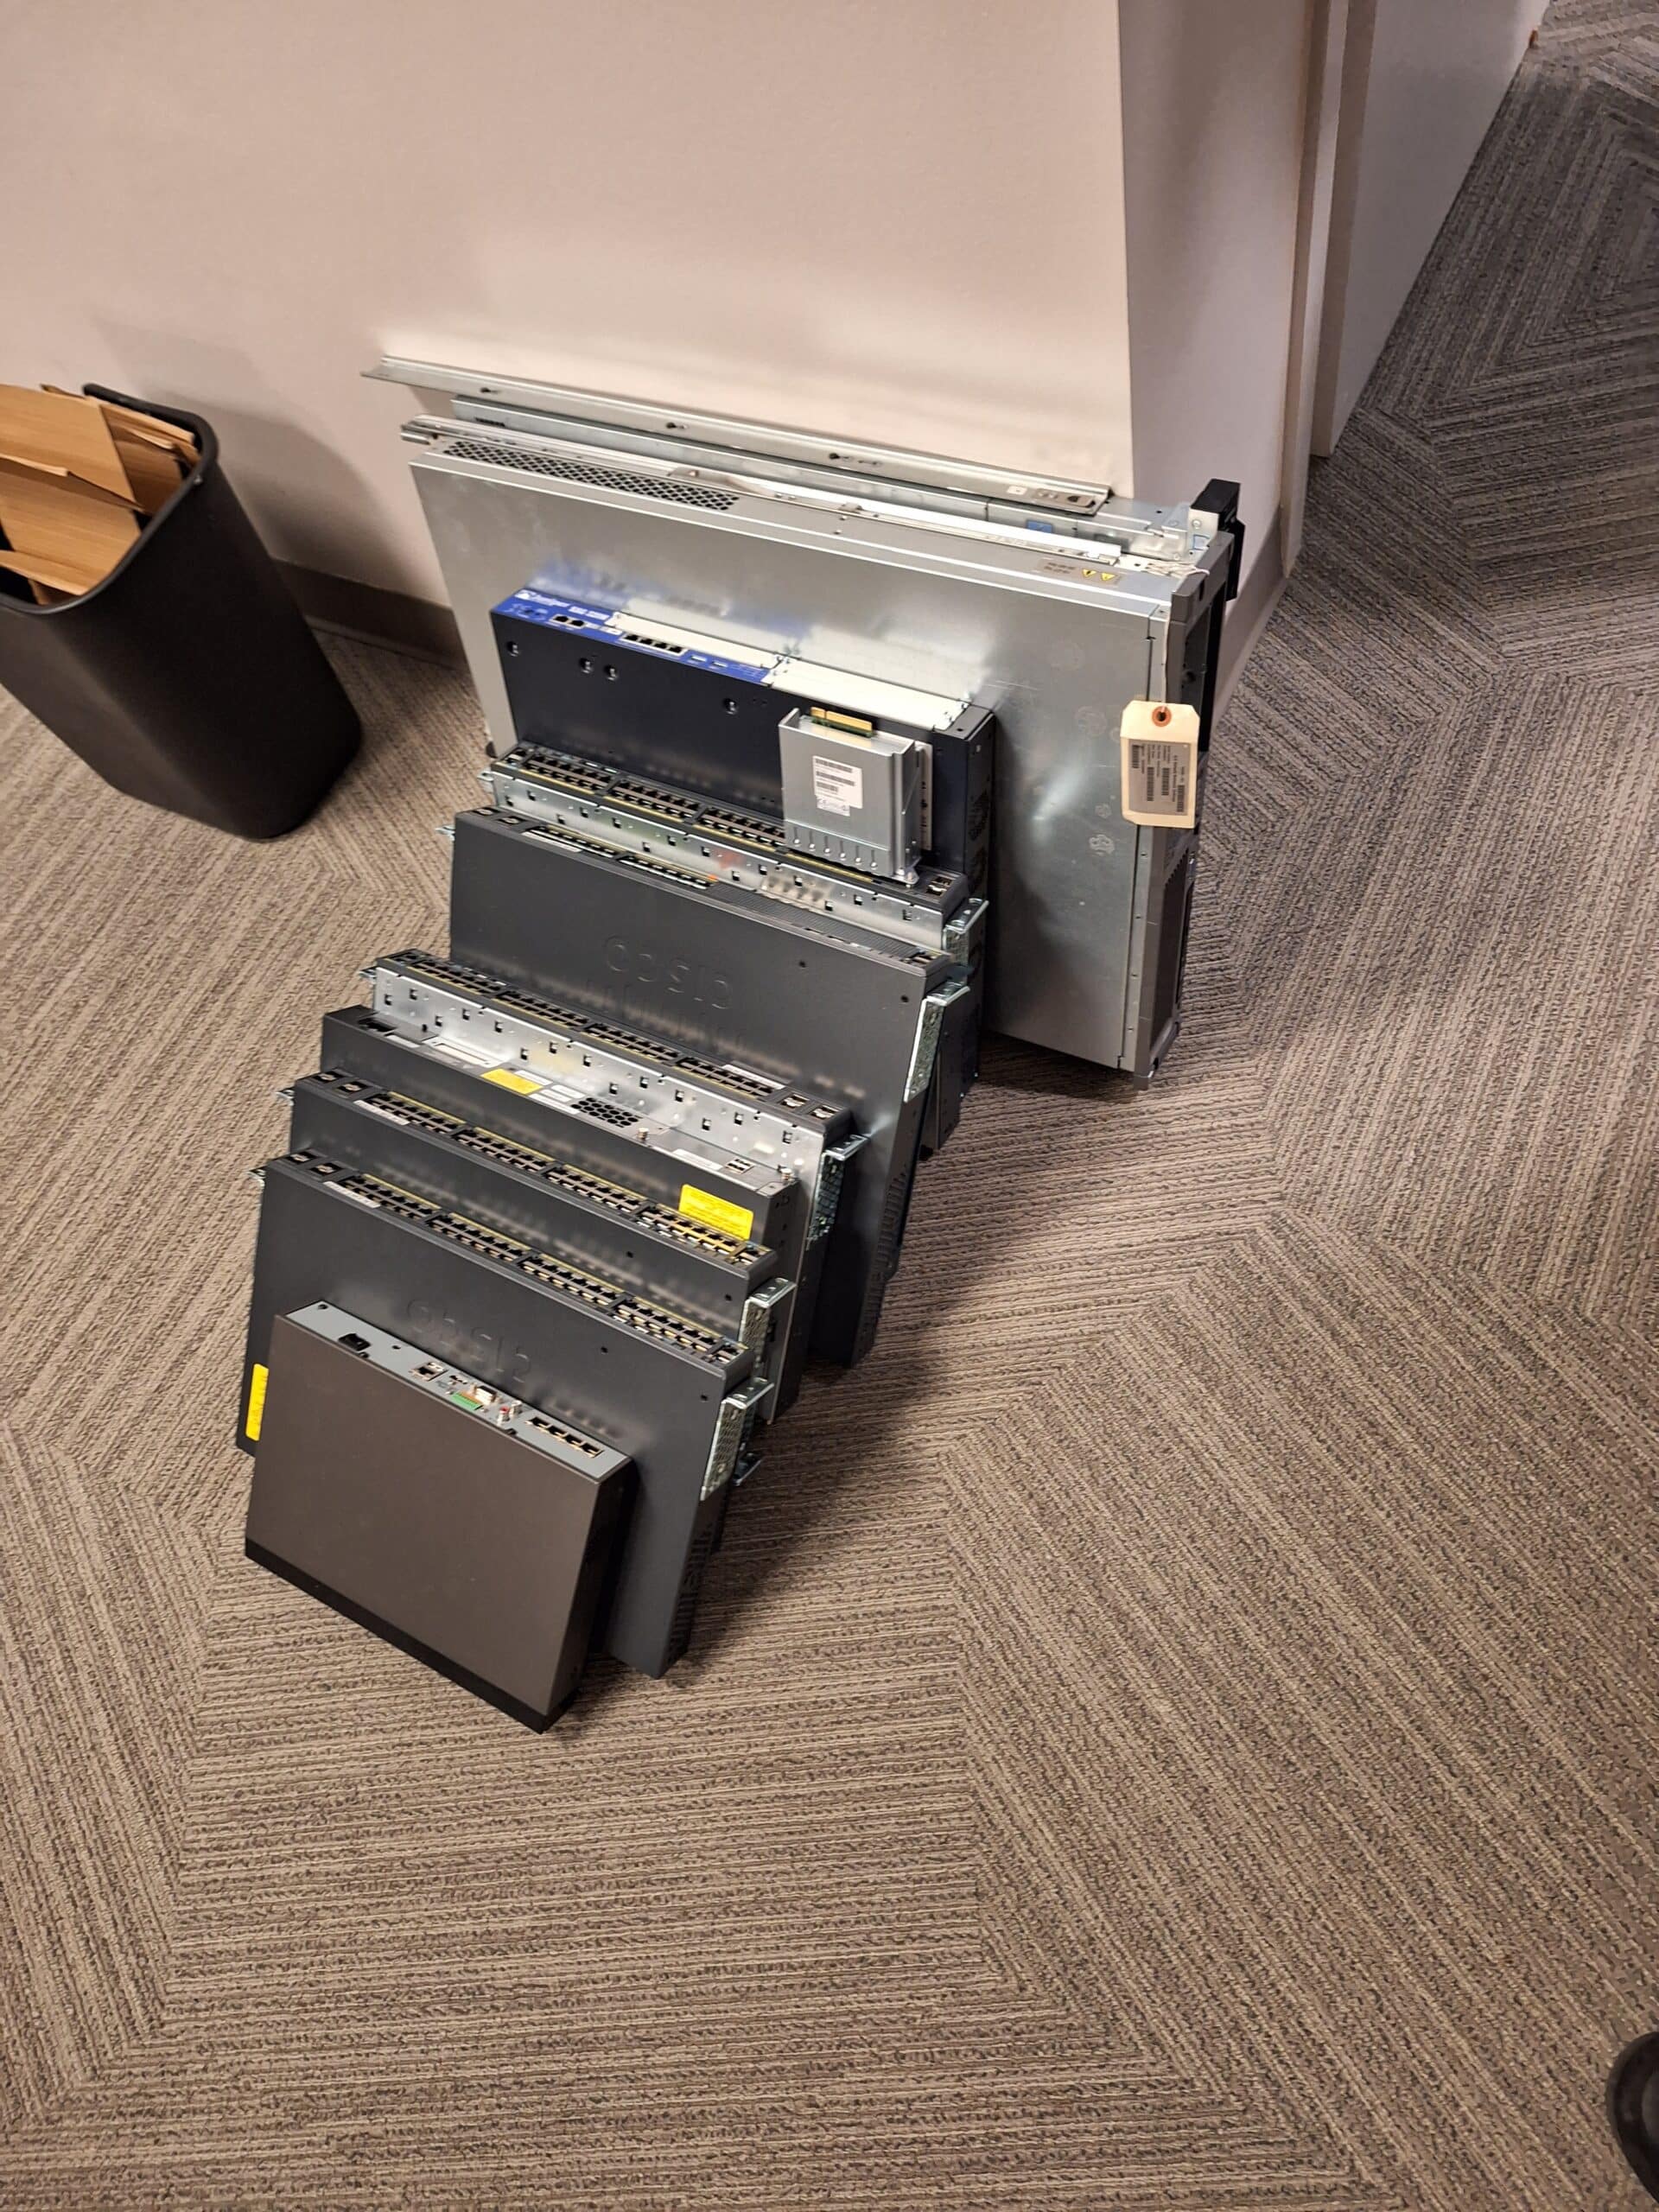 Dealing with IT Equipment Disposal: A Quick Guide